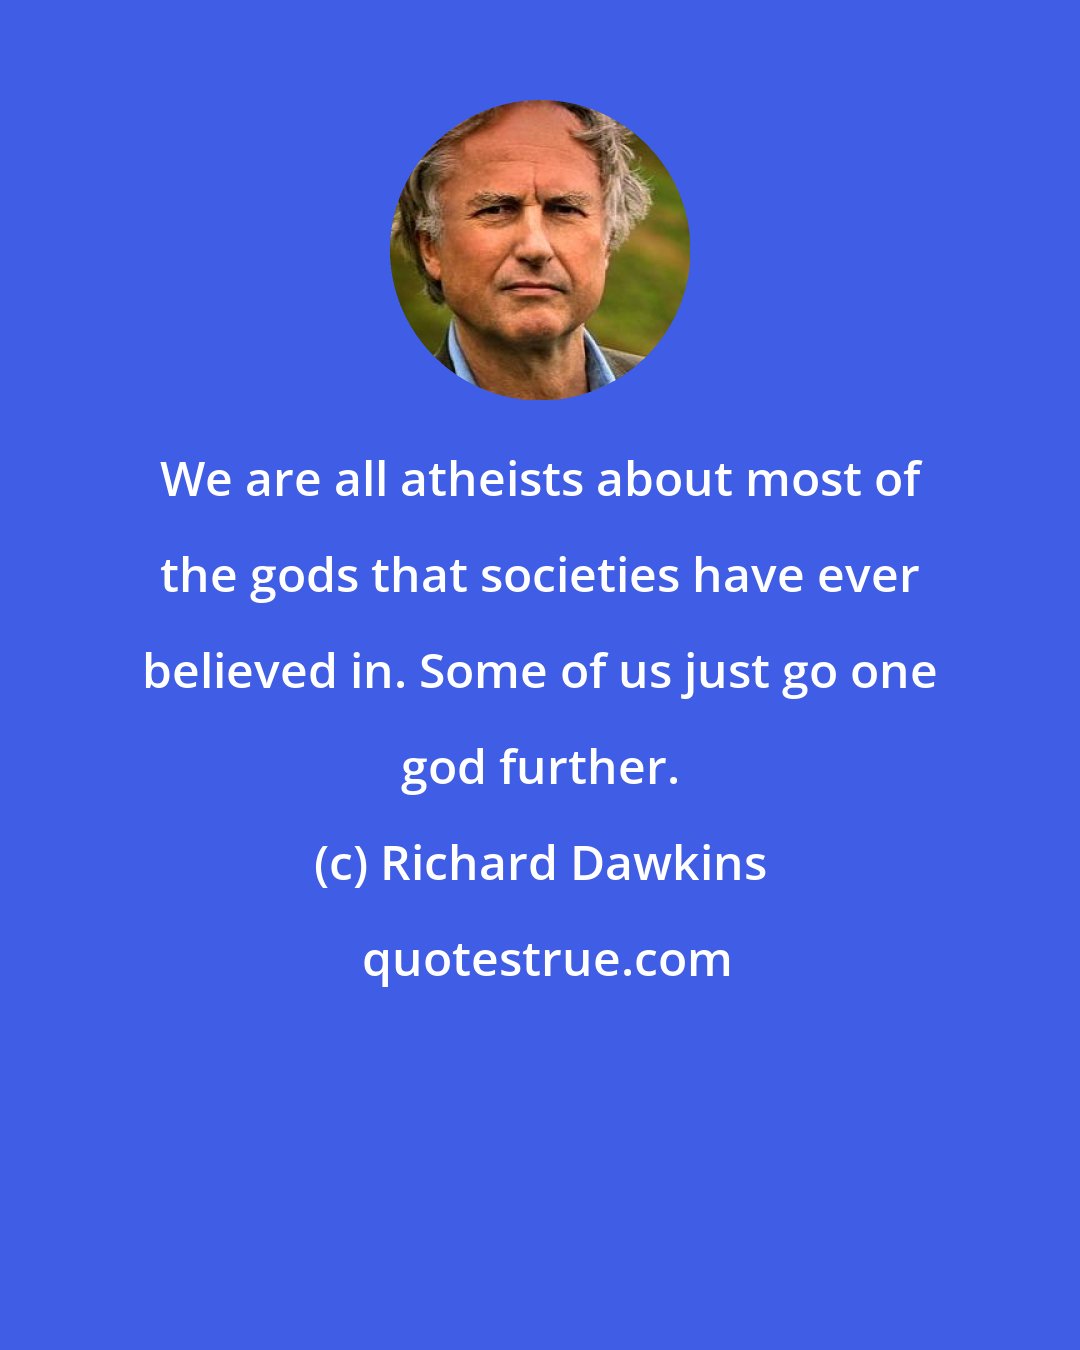 Richard Dawkins: We are all atheists about most of the gods that societies have ever believed in. Some of us just go one god further.